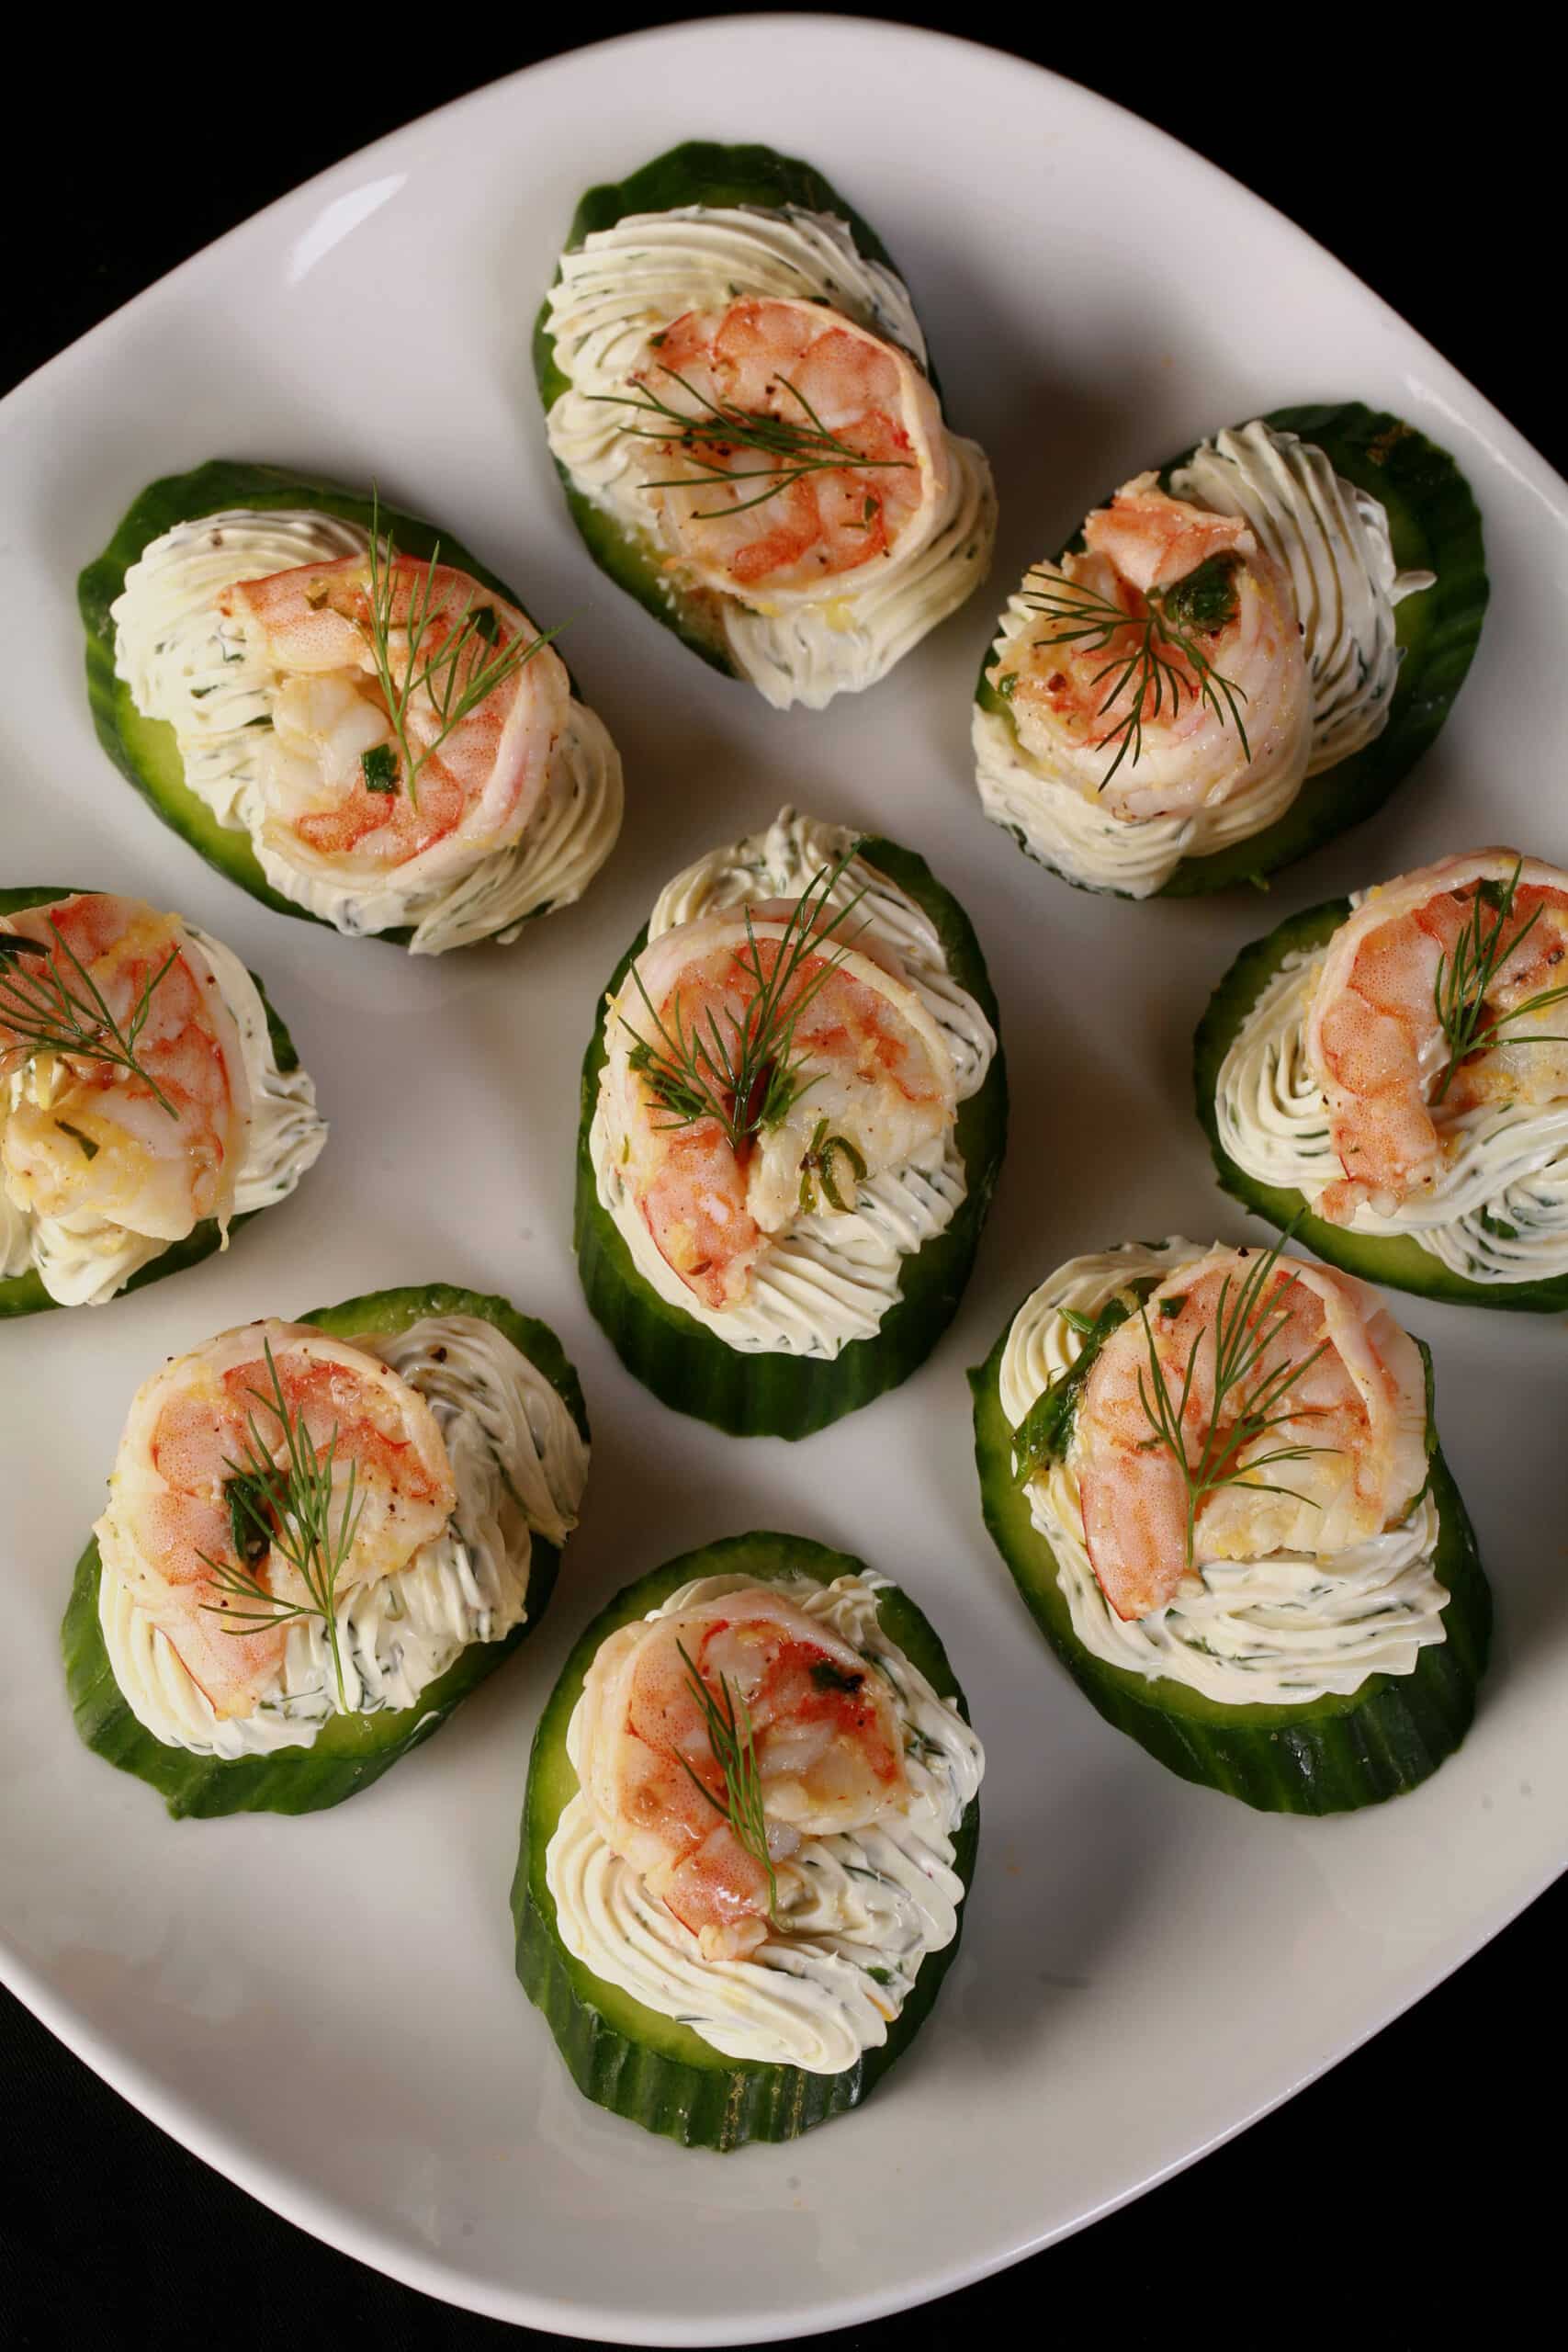 A plate of cucumber canapes, topped with herb cream cheese, shrimp, and dill.